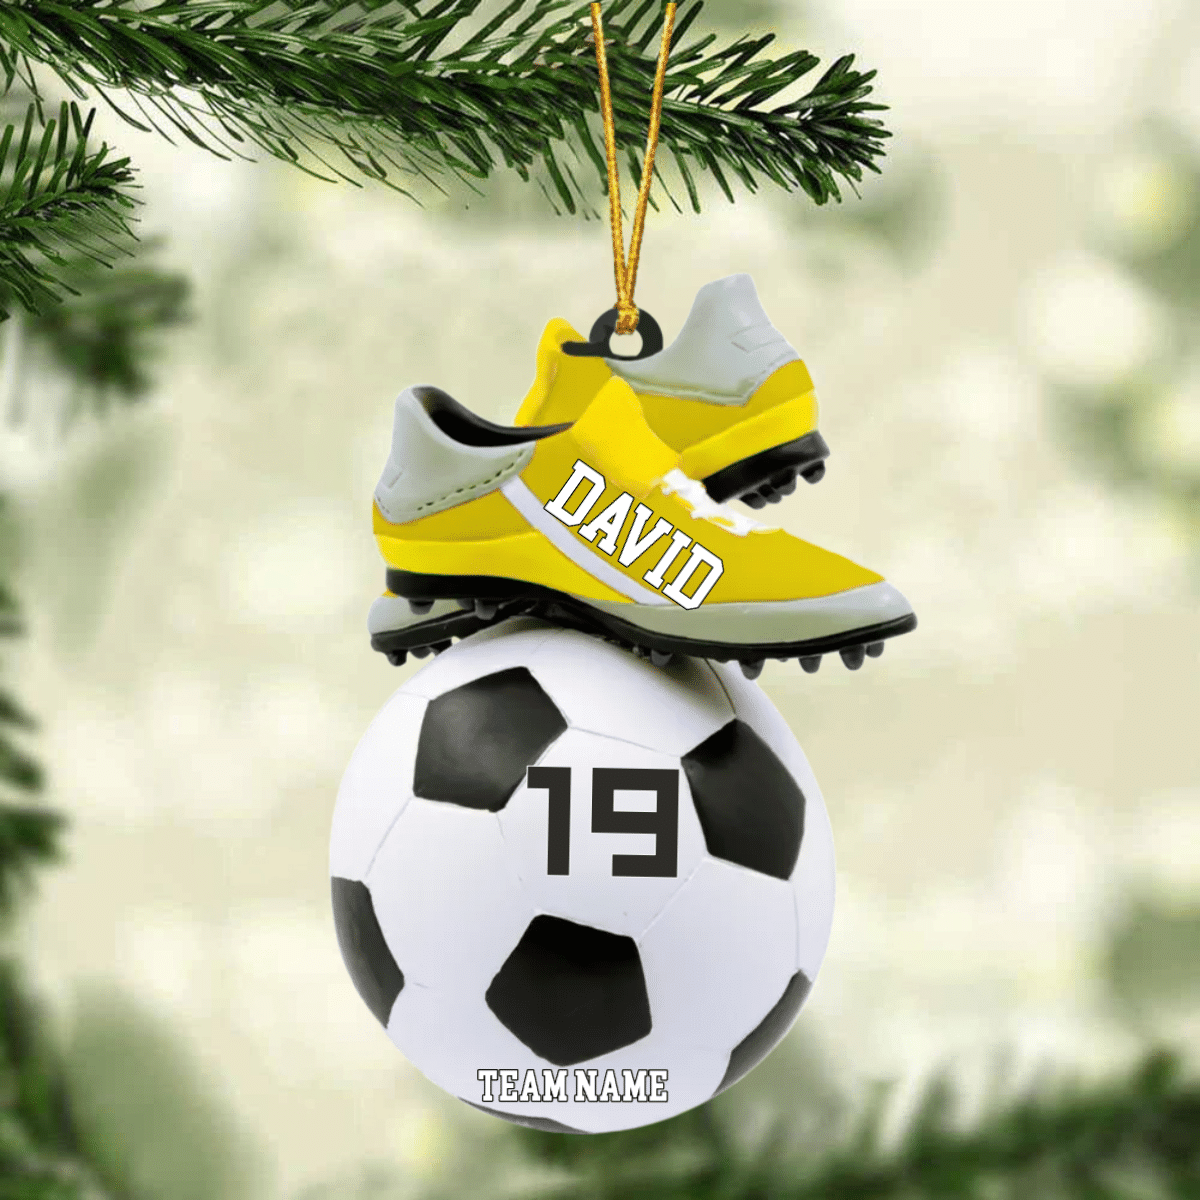 2022 Personalized Soccer Christmas Ornament - Great Gift Idea For Soccer Players & Soccer Lovers